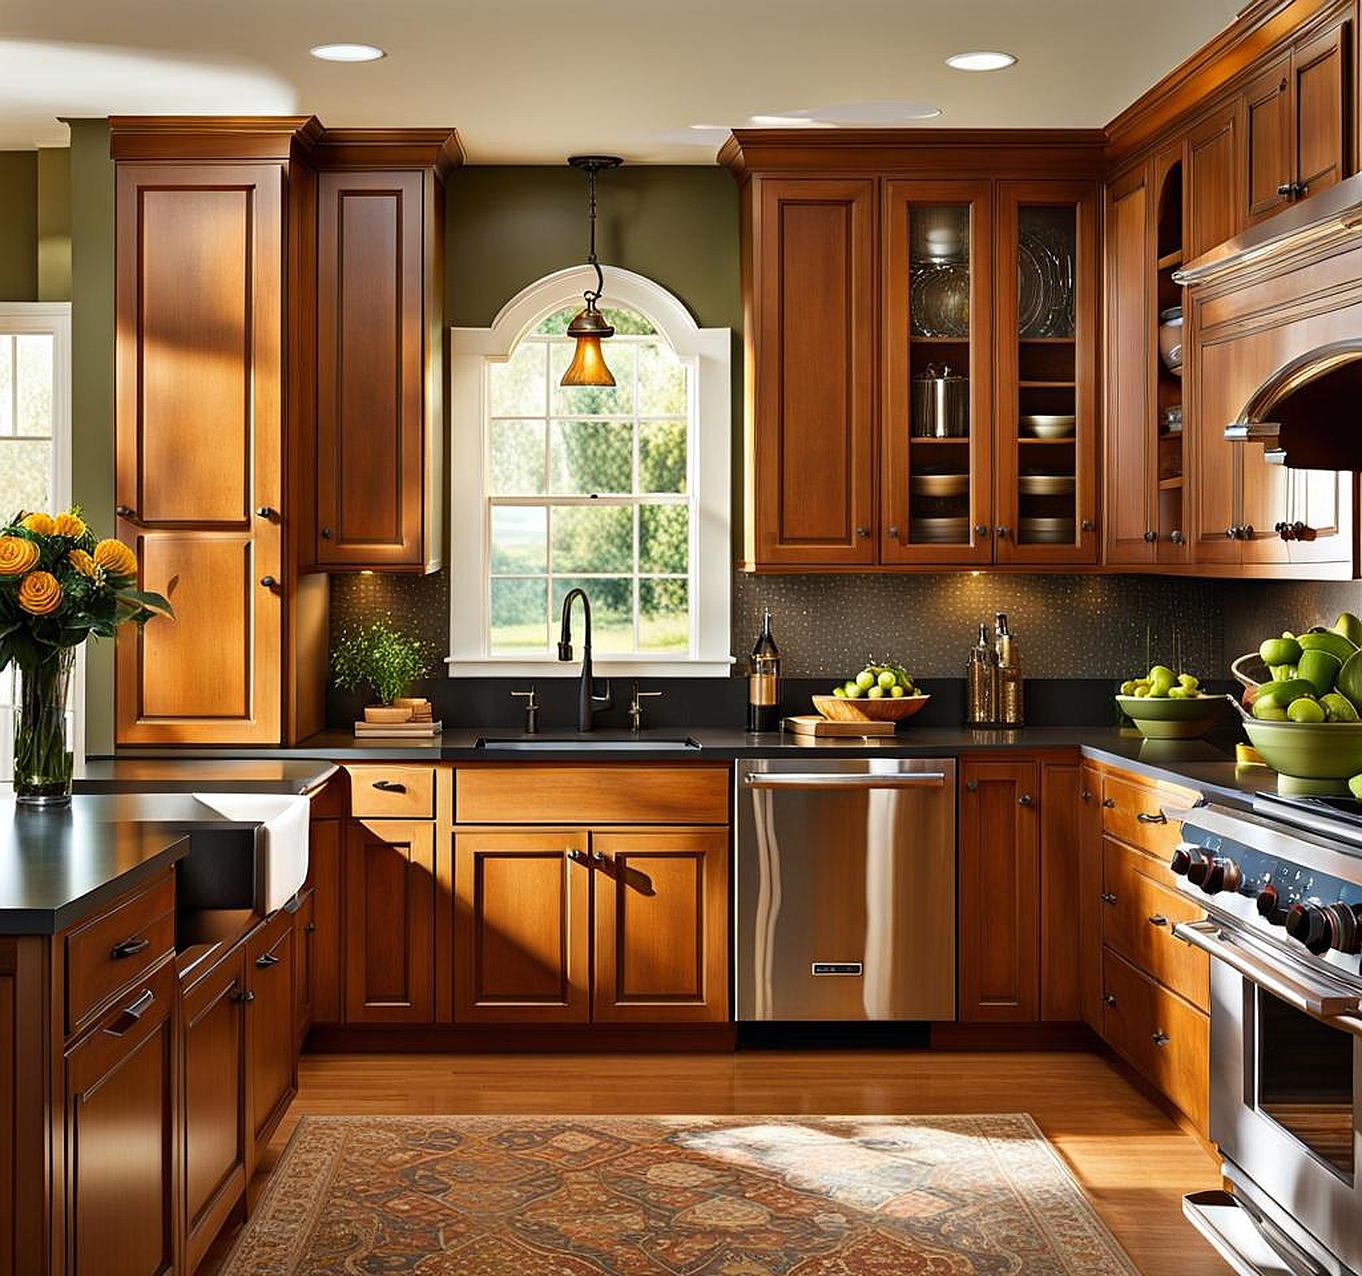 How to Hire Professionals to Paint Kitchen Cabinets